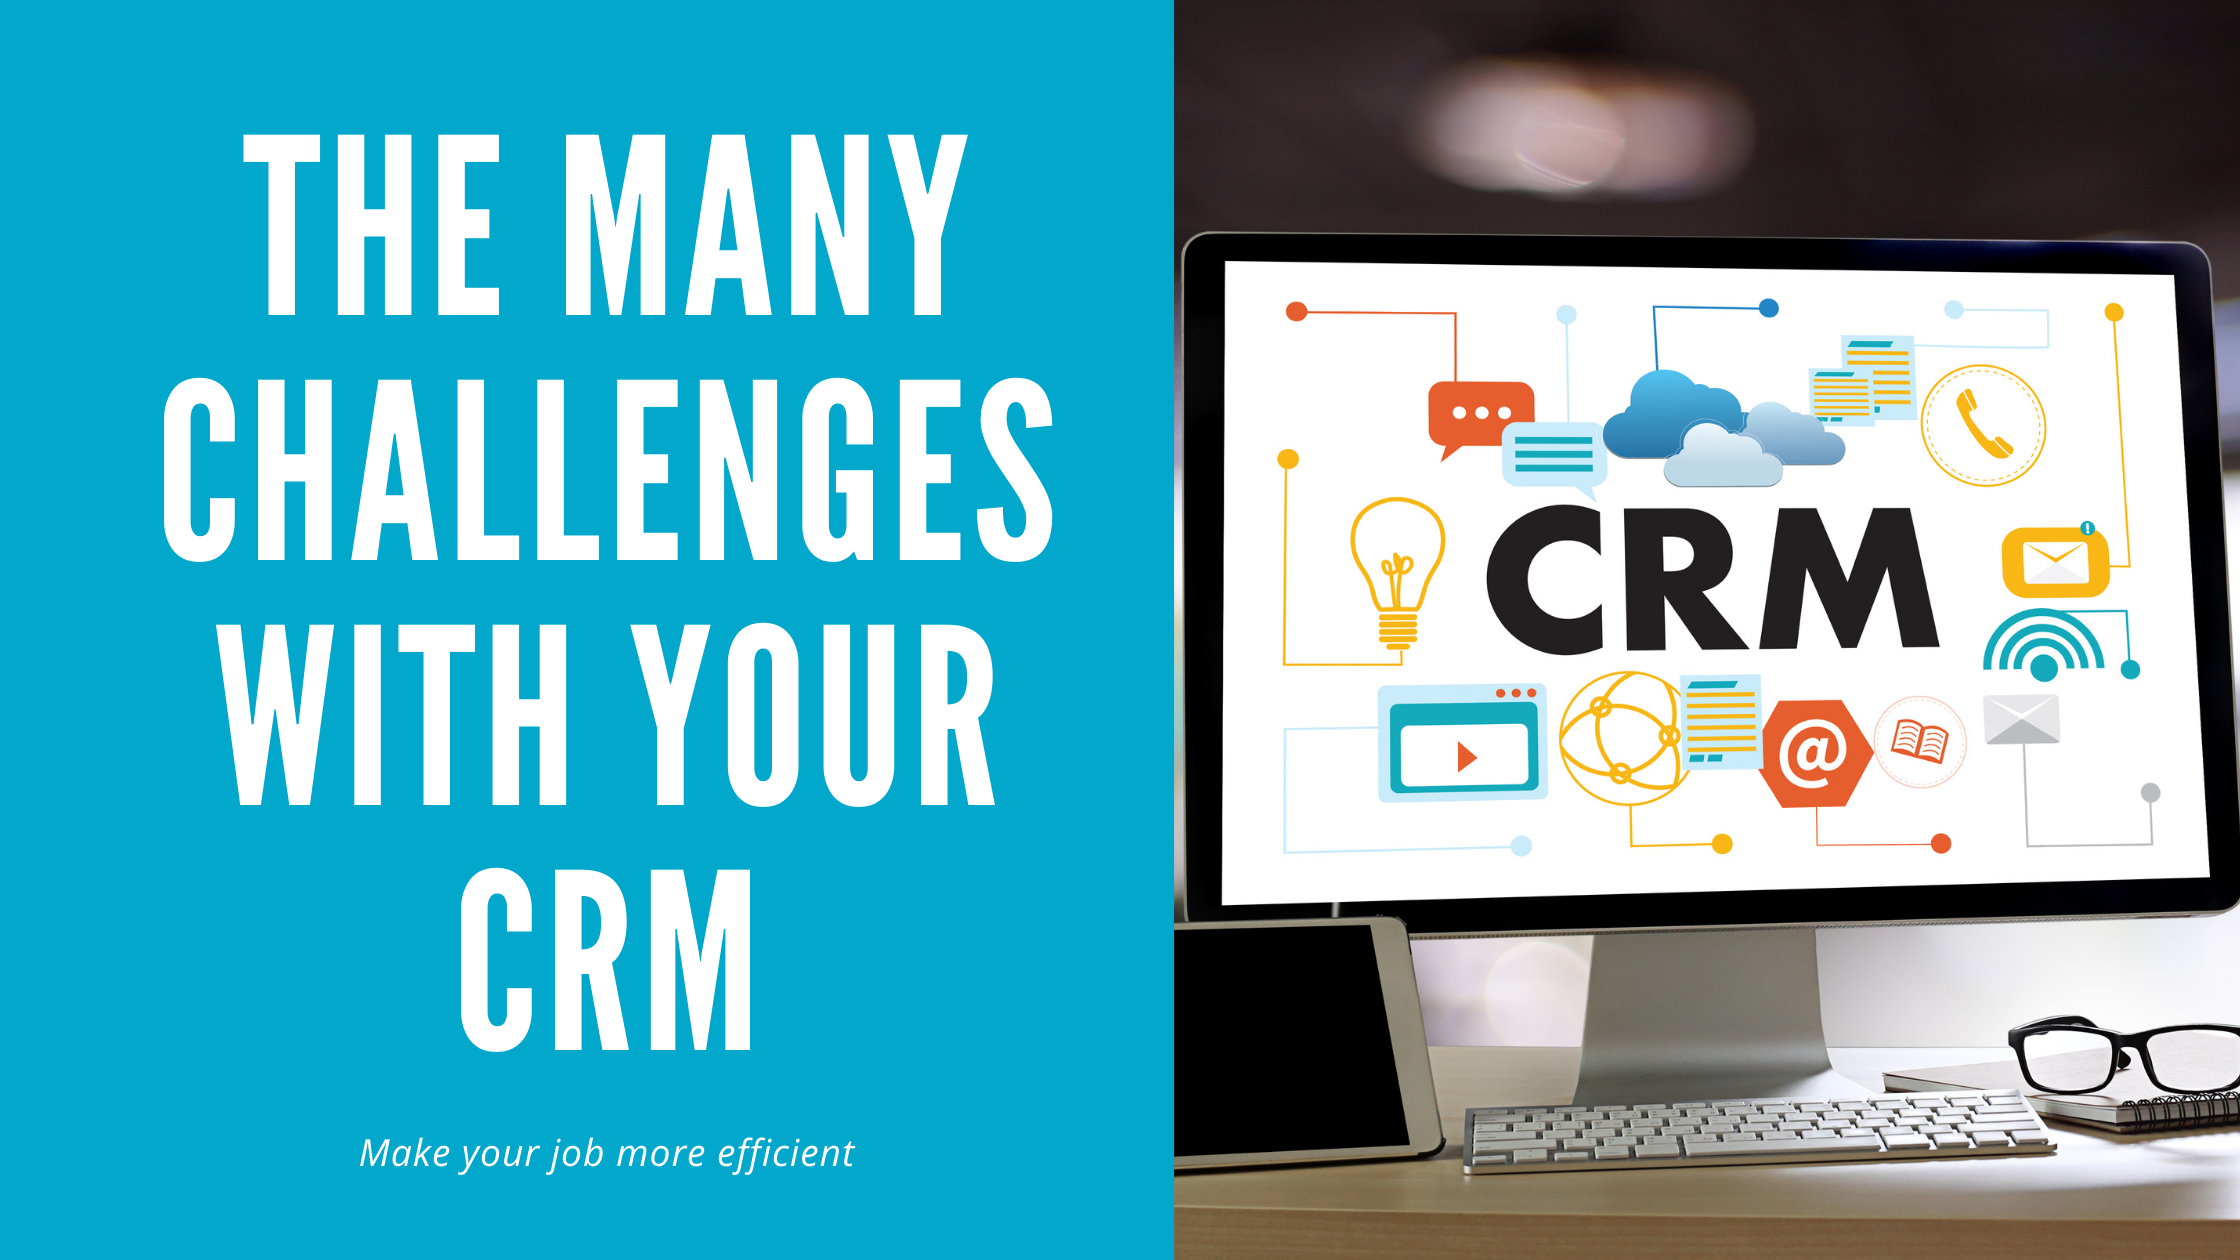 The Many Challenges with your CRM